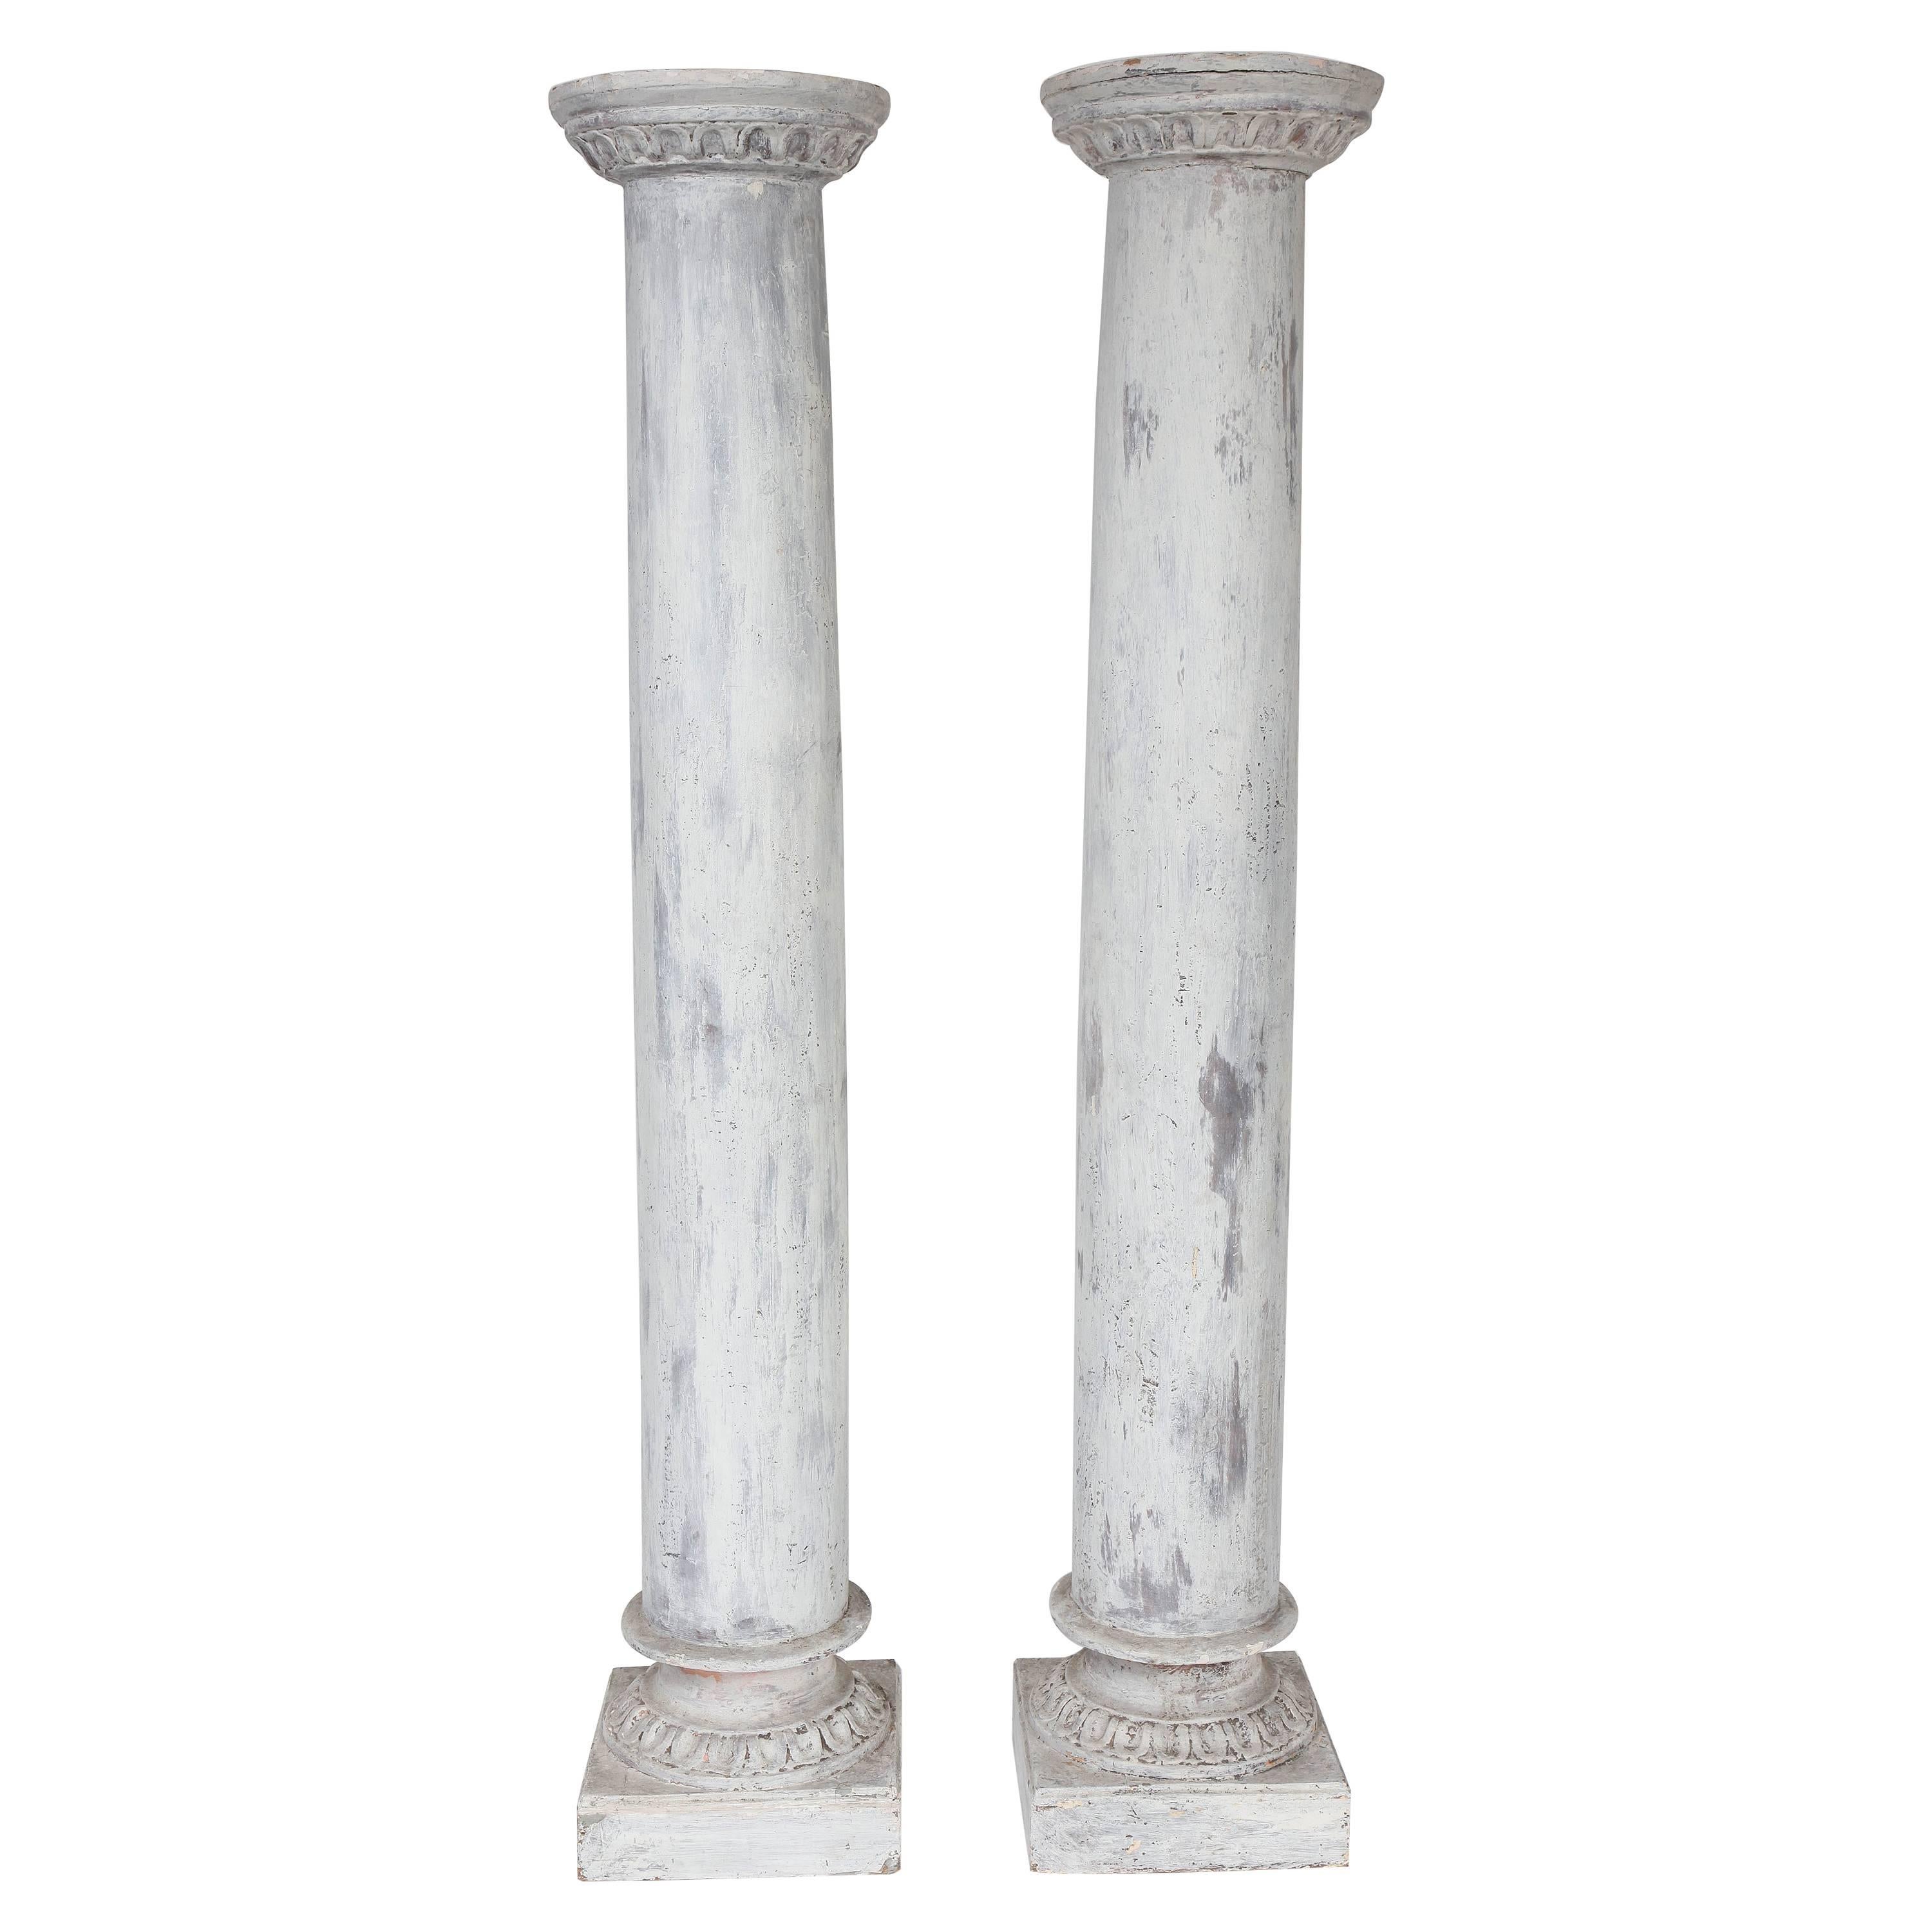 Pair of Architectural Columns